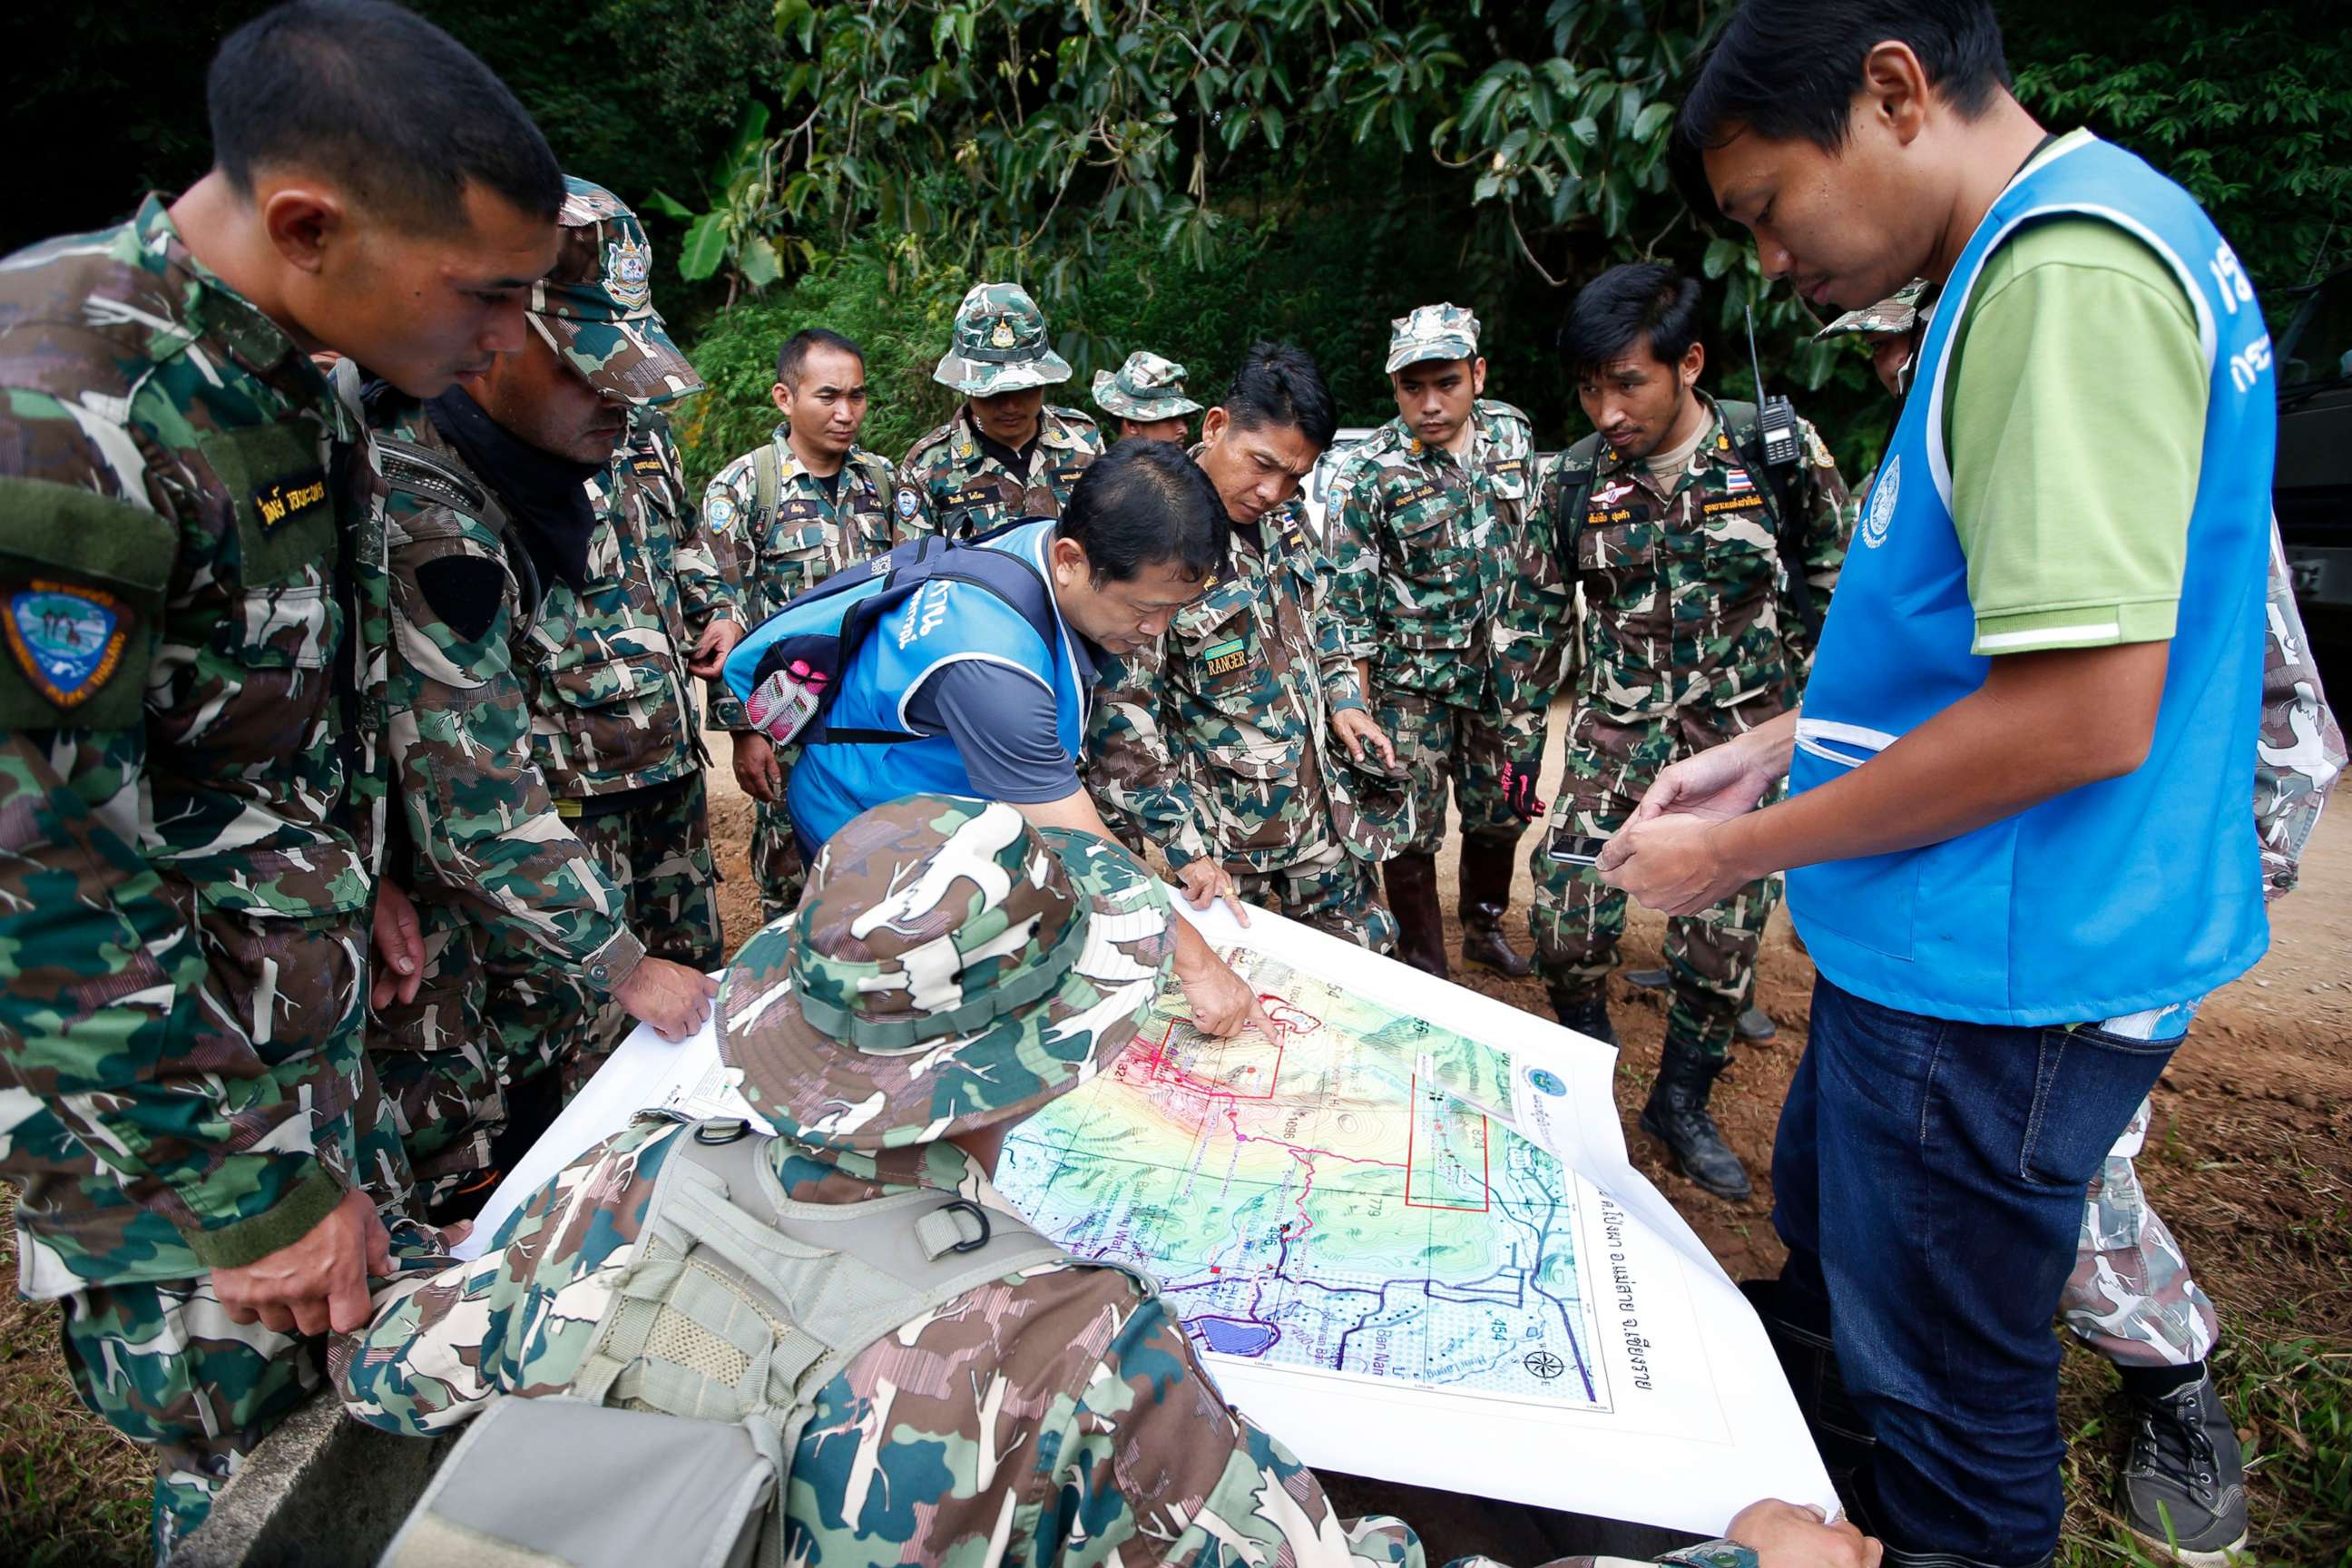 PHOTO: Thai forest rangers examine a map to view possible drilling options during the ongoing rescue operations for the child soccer team and their assistant coach, in Chiang Rai province, Thailand, July 7, 2018.